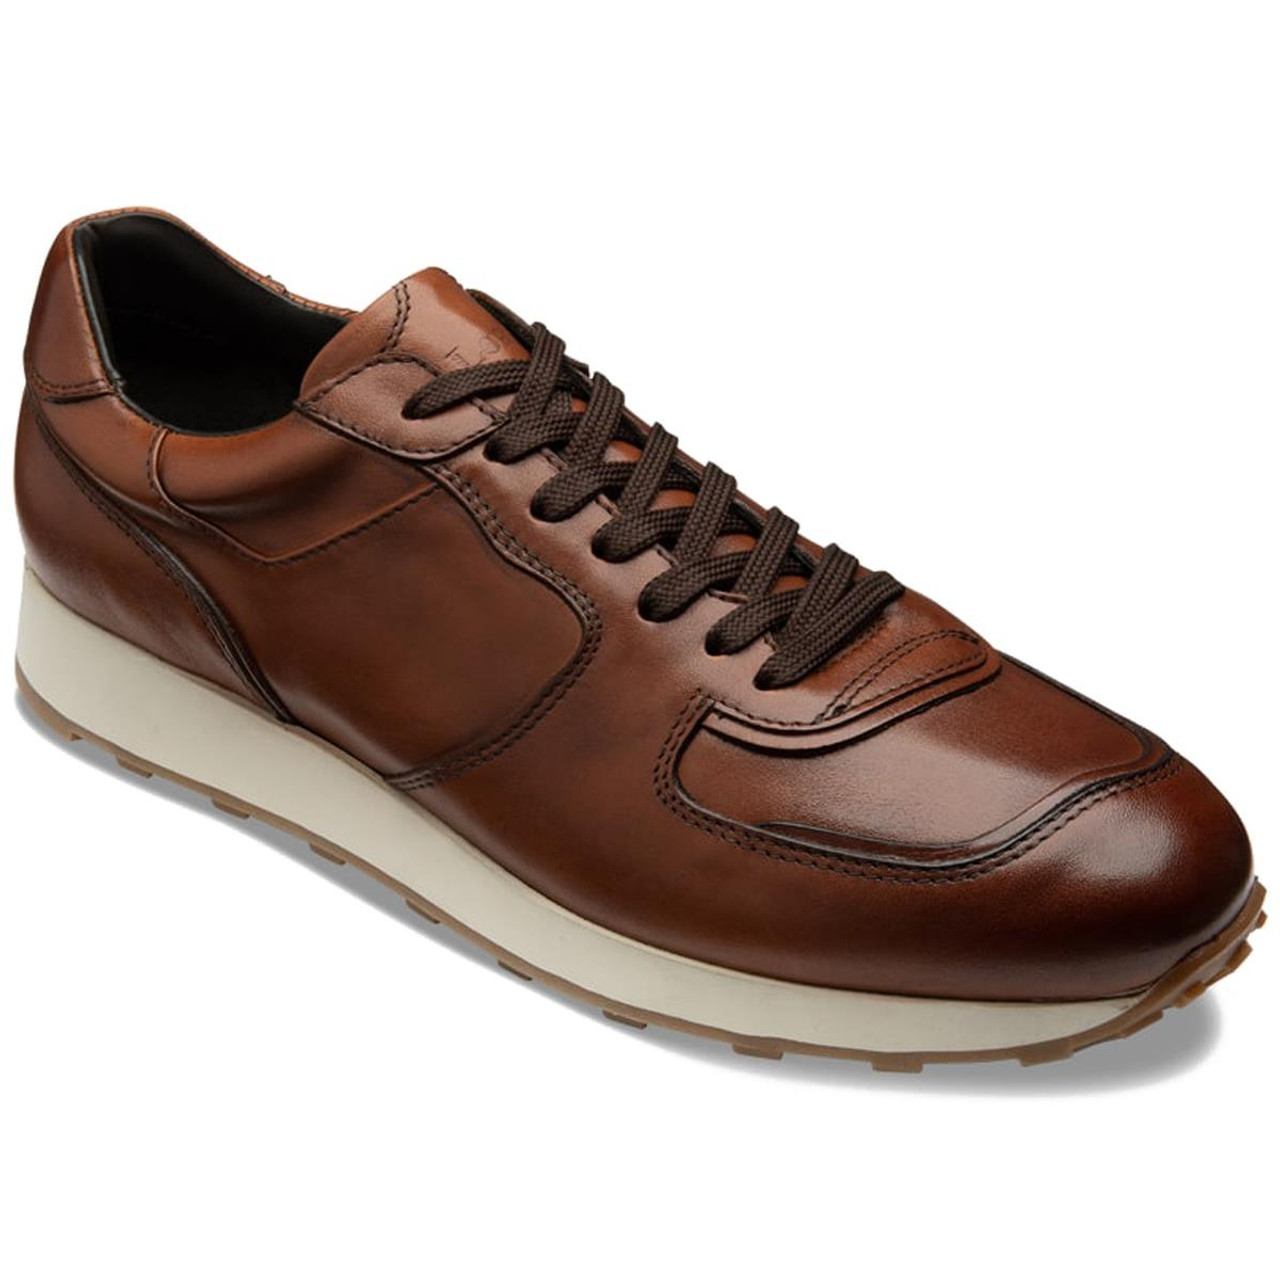 What is the purpose of the Loake trainers?